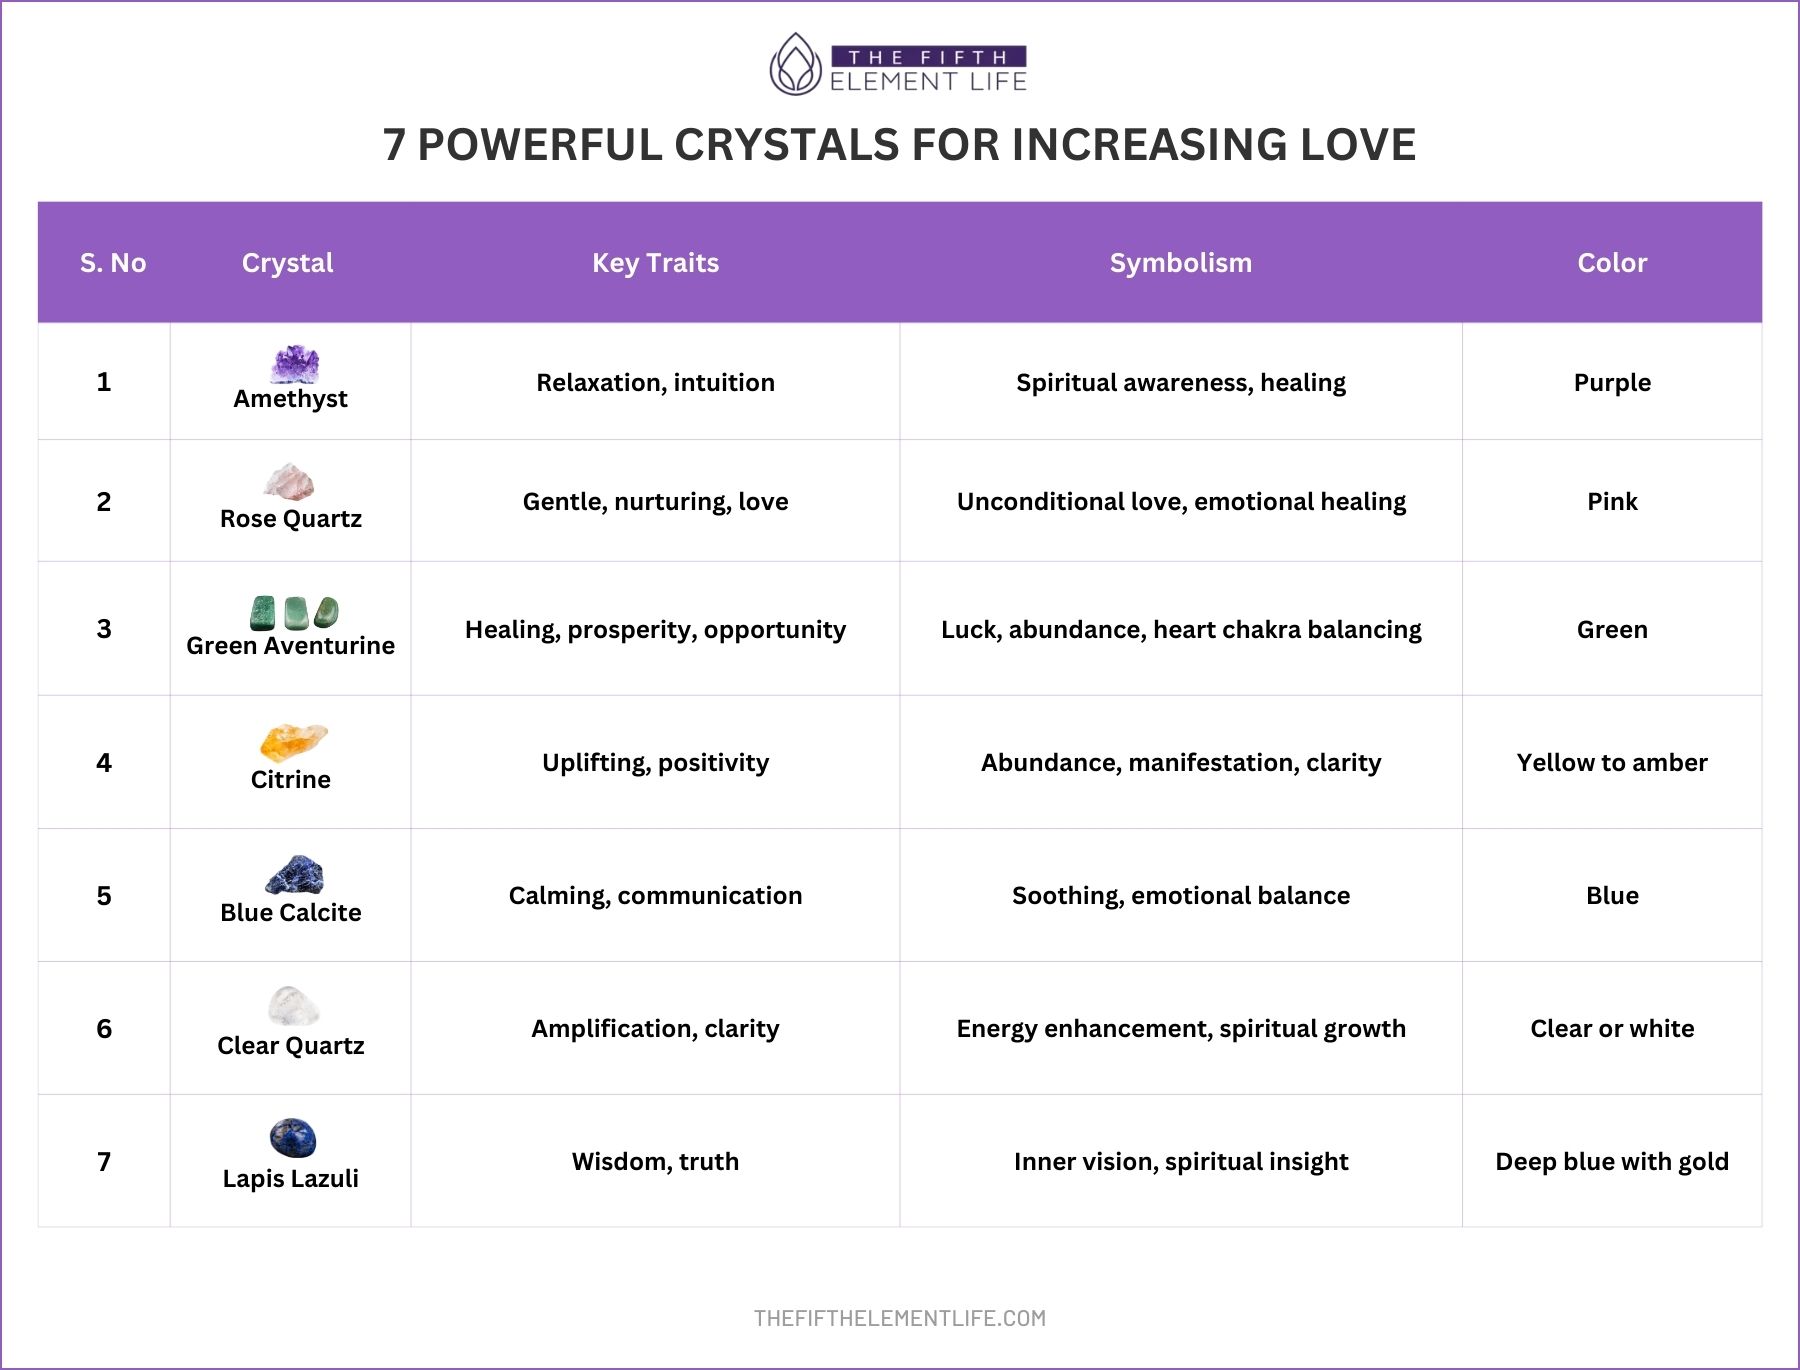 7 Powerful Crystals For Increasing Love